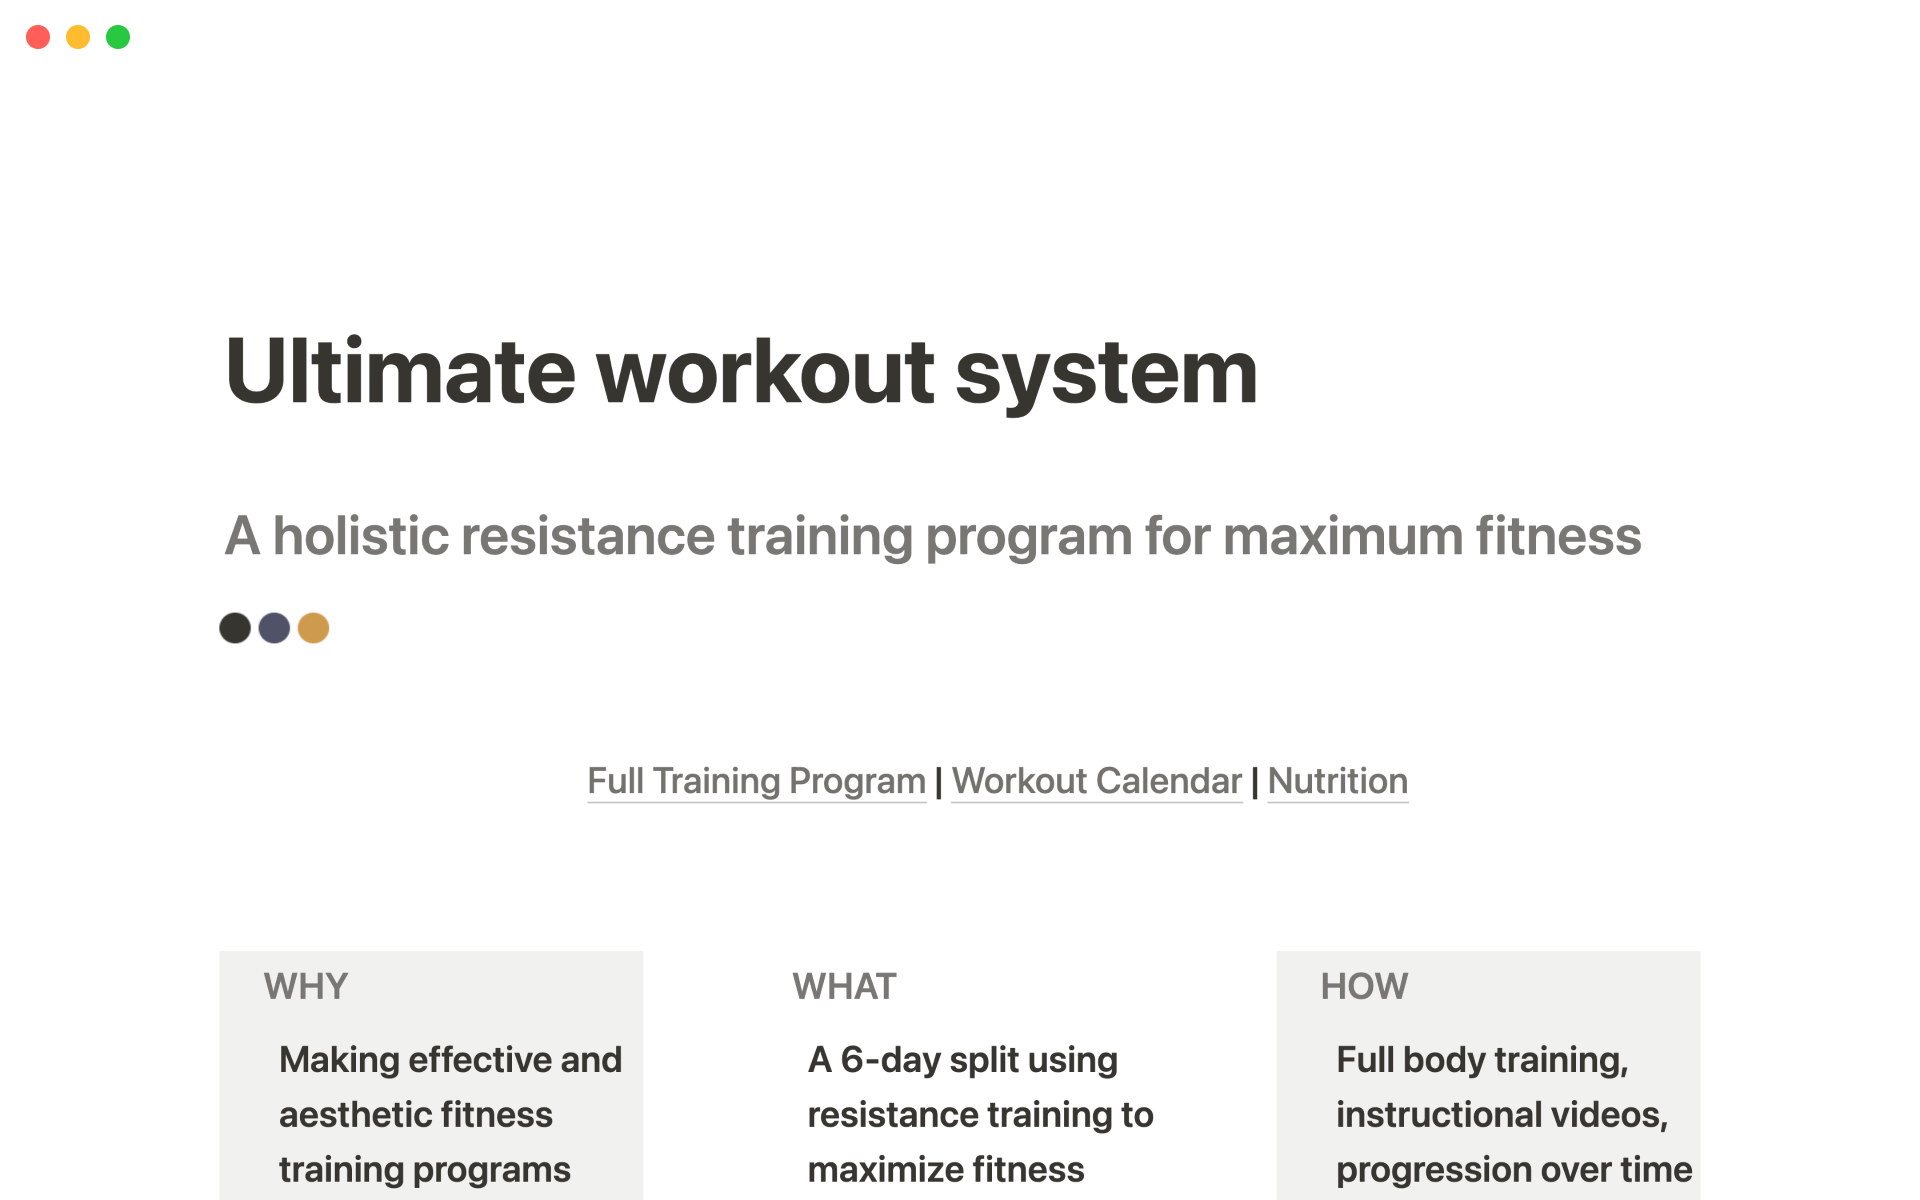 Centralize the process of planning, tracking and reviewing workout sessions